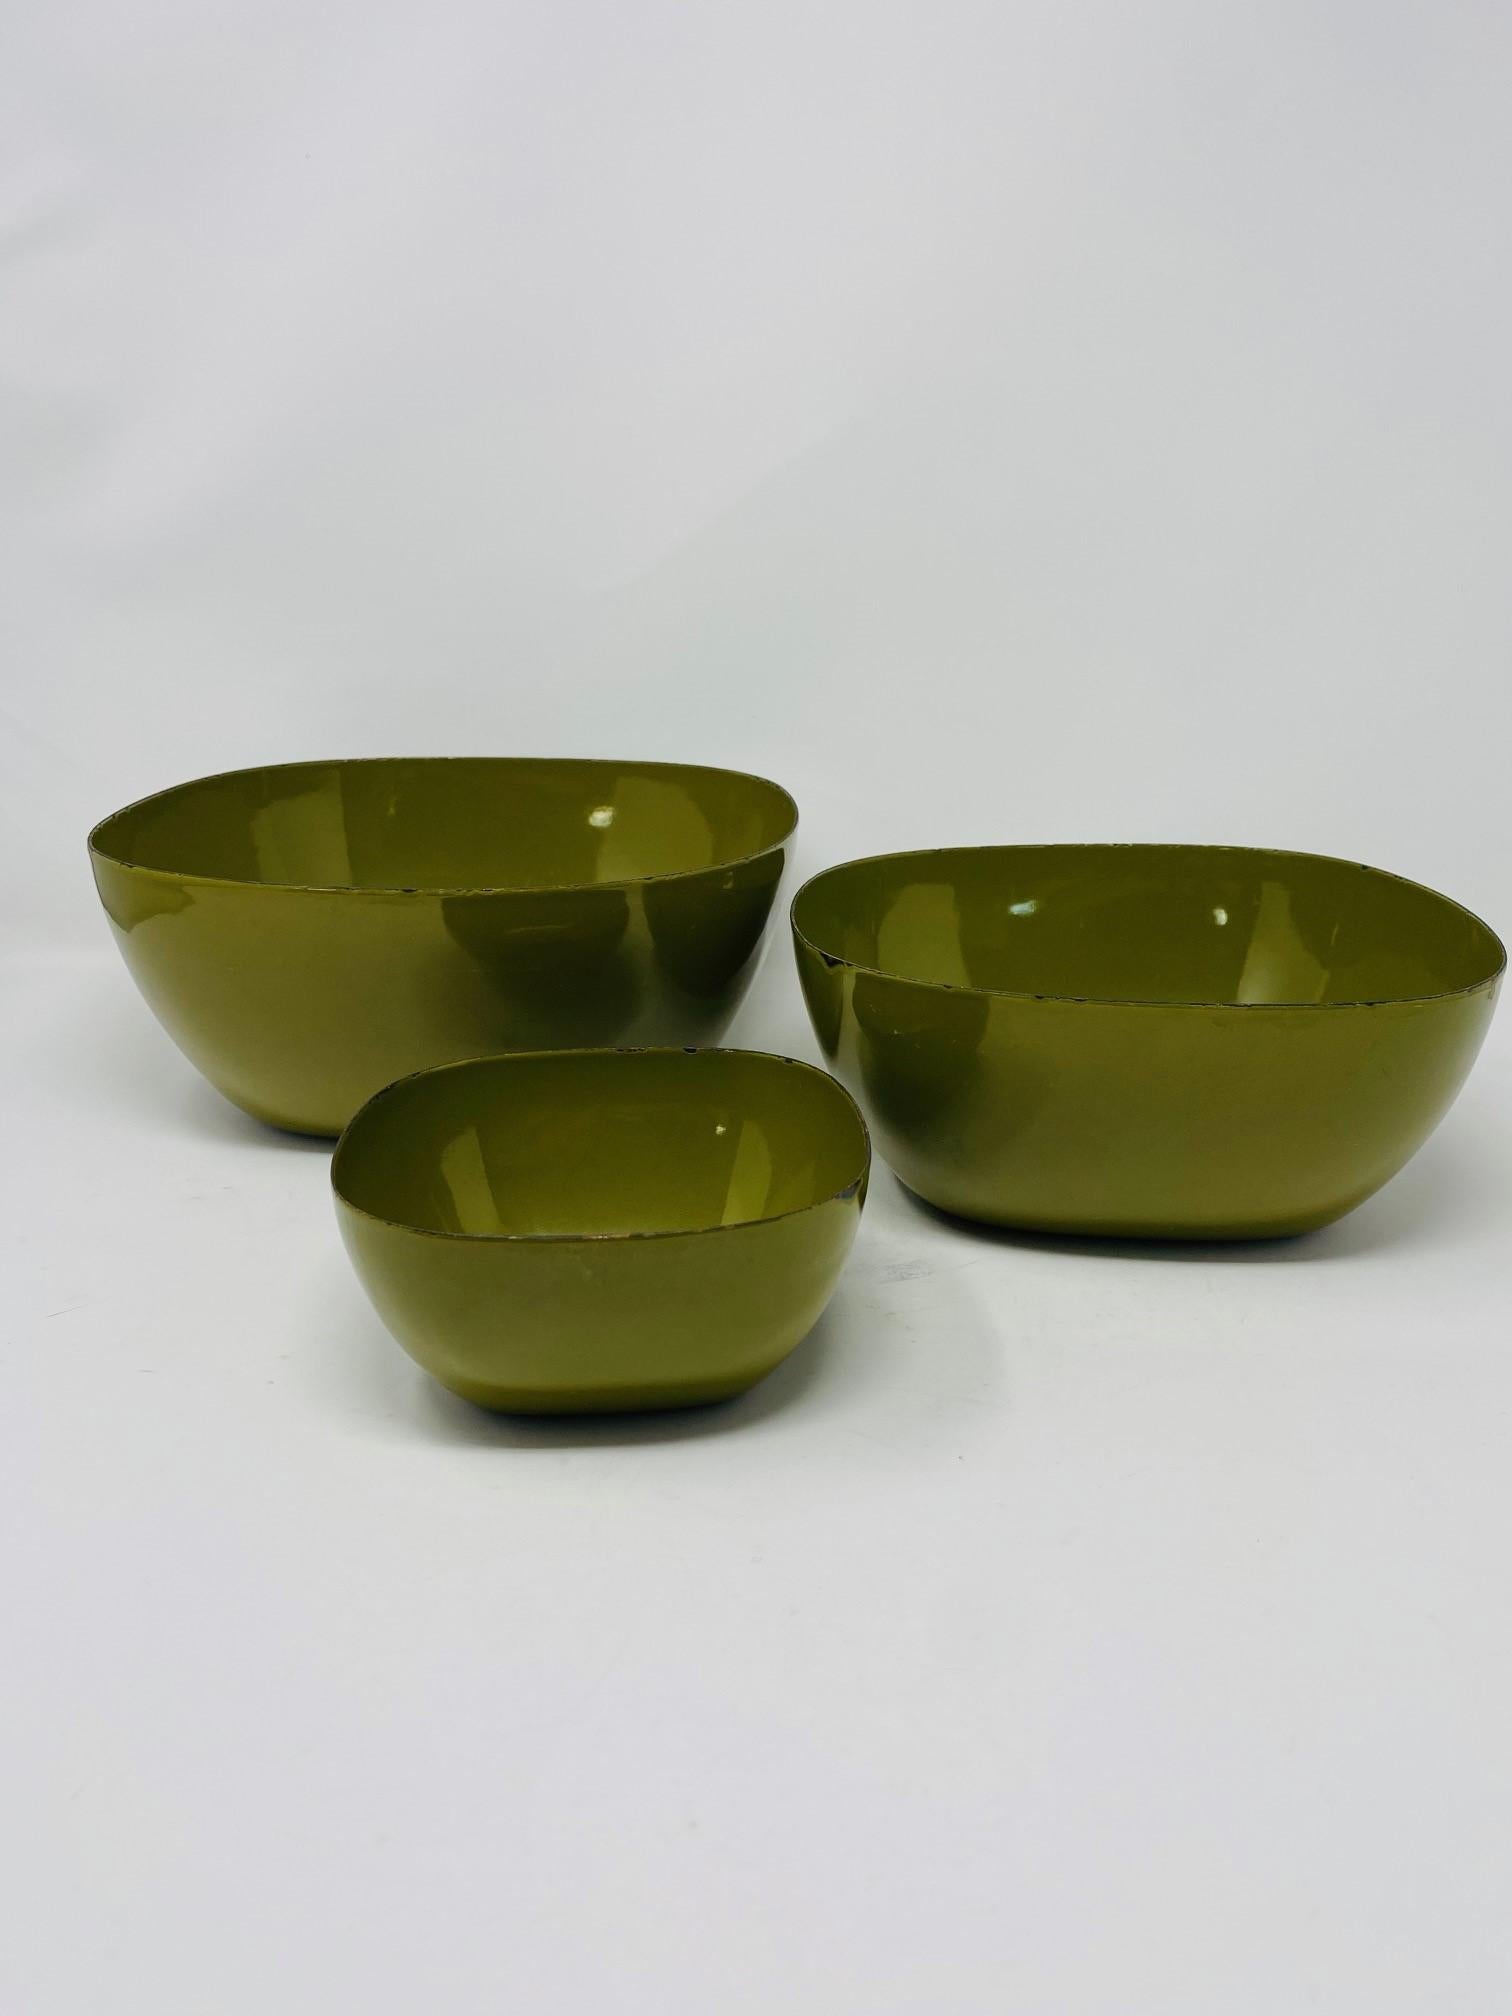 Mid Century Vintage Cathrineholm Enamelware Nesting Bowls Set of 3 Holland In Good Condition For Sale In San Diego, CA